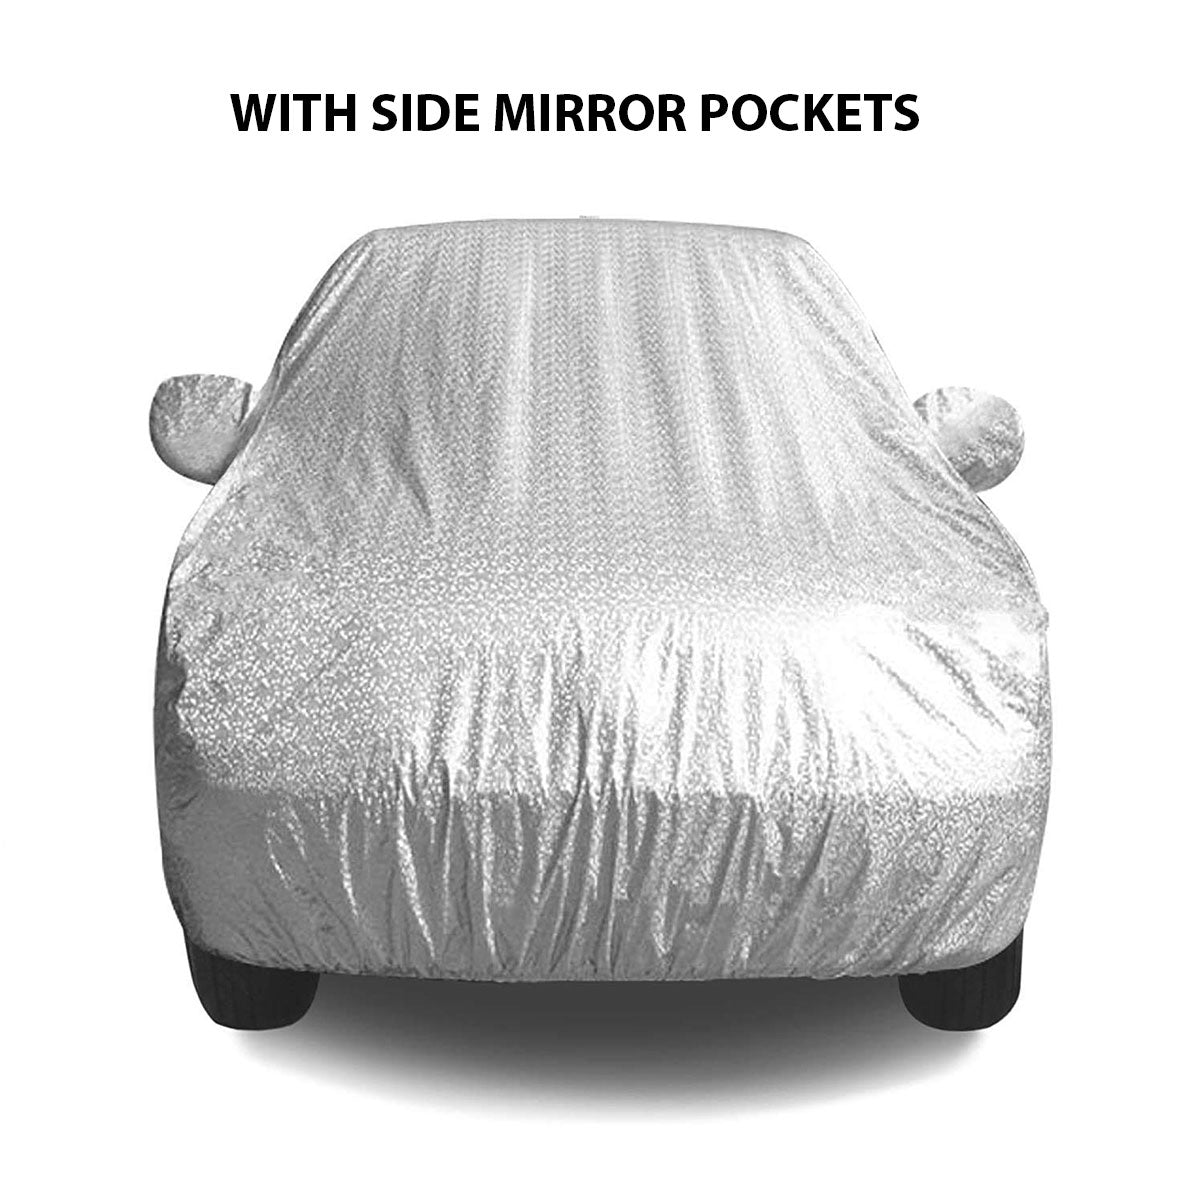 Oshotto Spyro Silver Anti Reflective, dustproof and Water Proof Car Body Cover with Mirror Pockets For Tata Indica